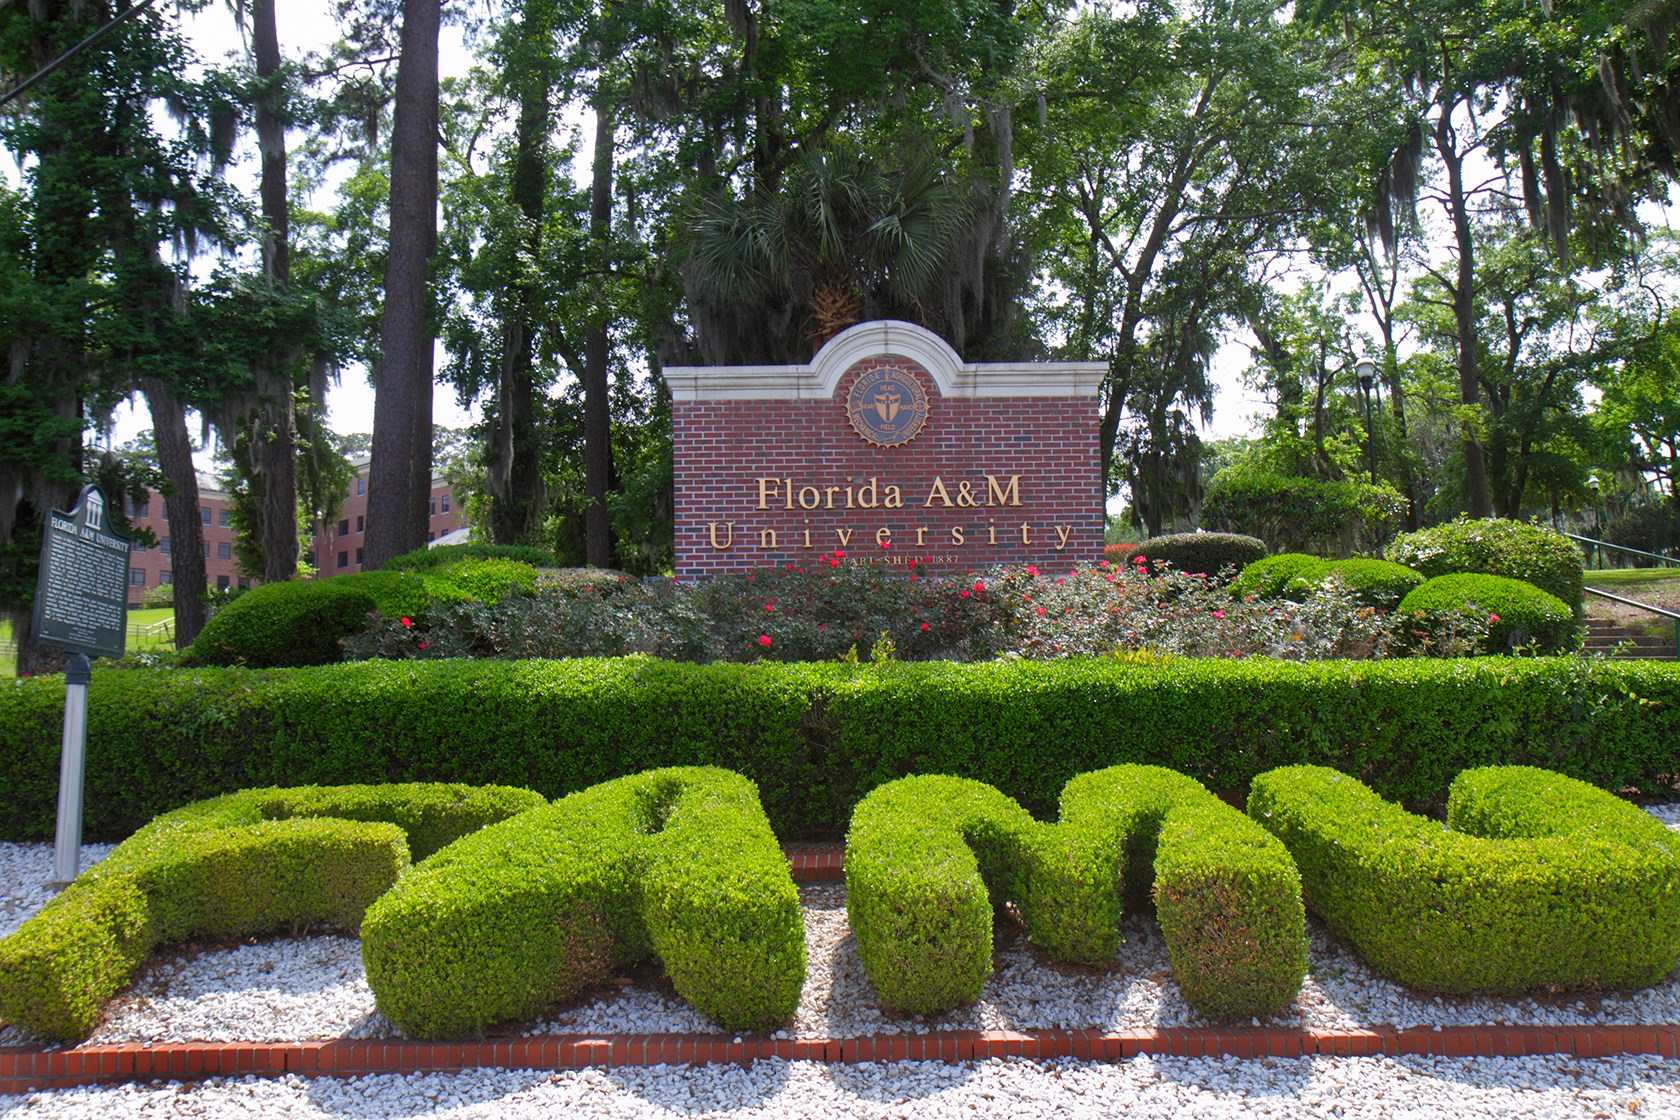 Florida A&M University entrance sign, with FAMU spelled out in trimmed bushes